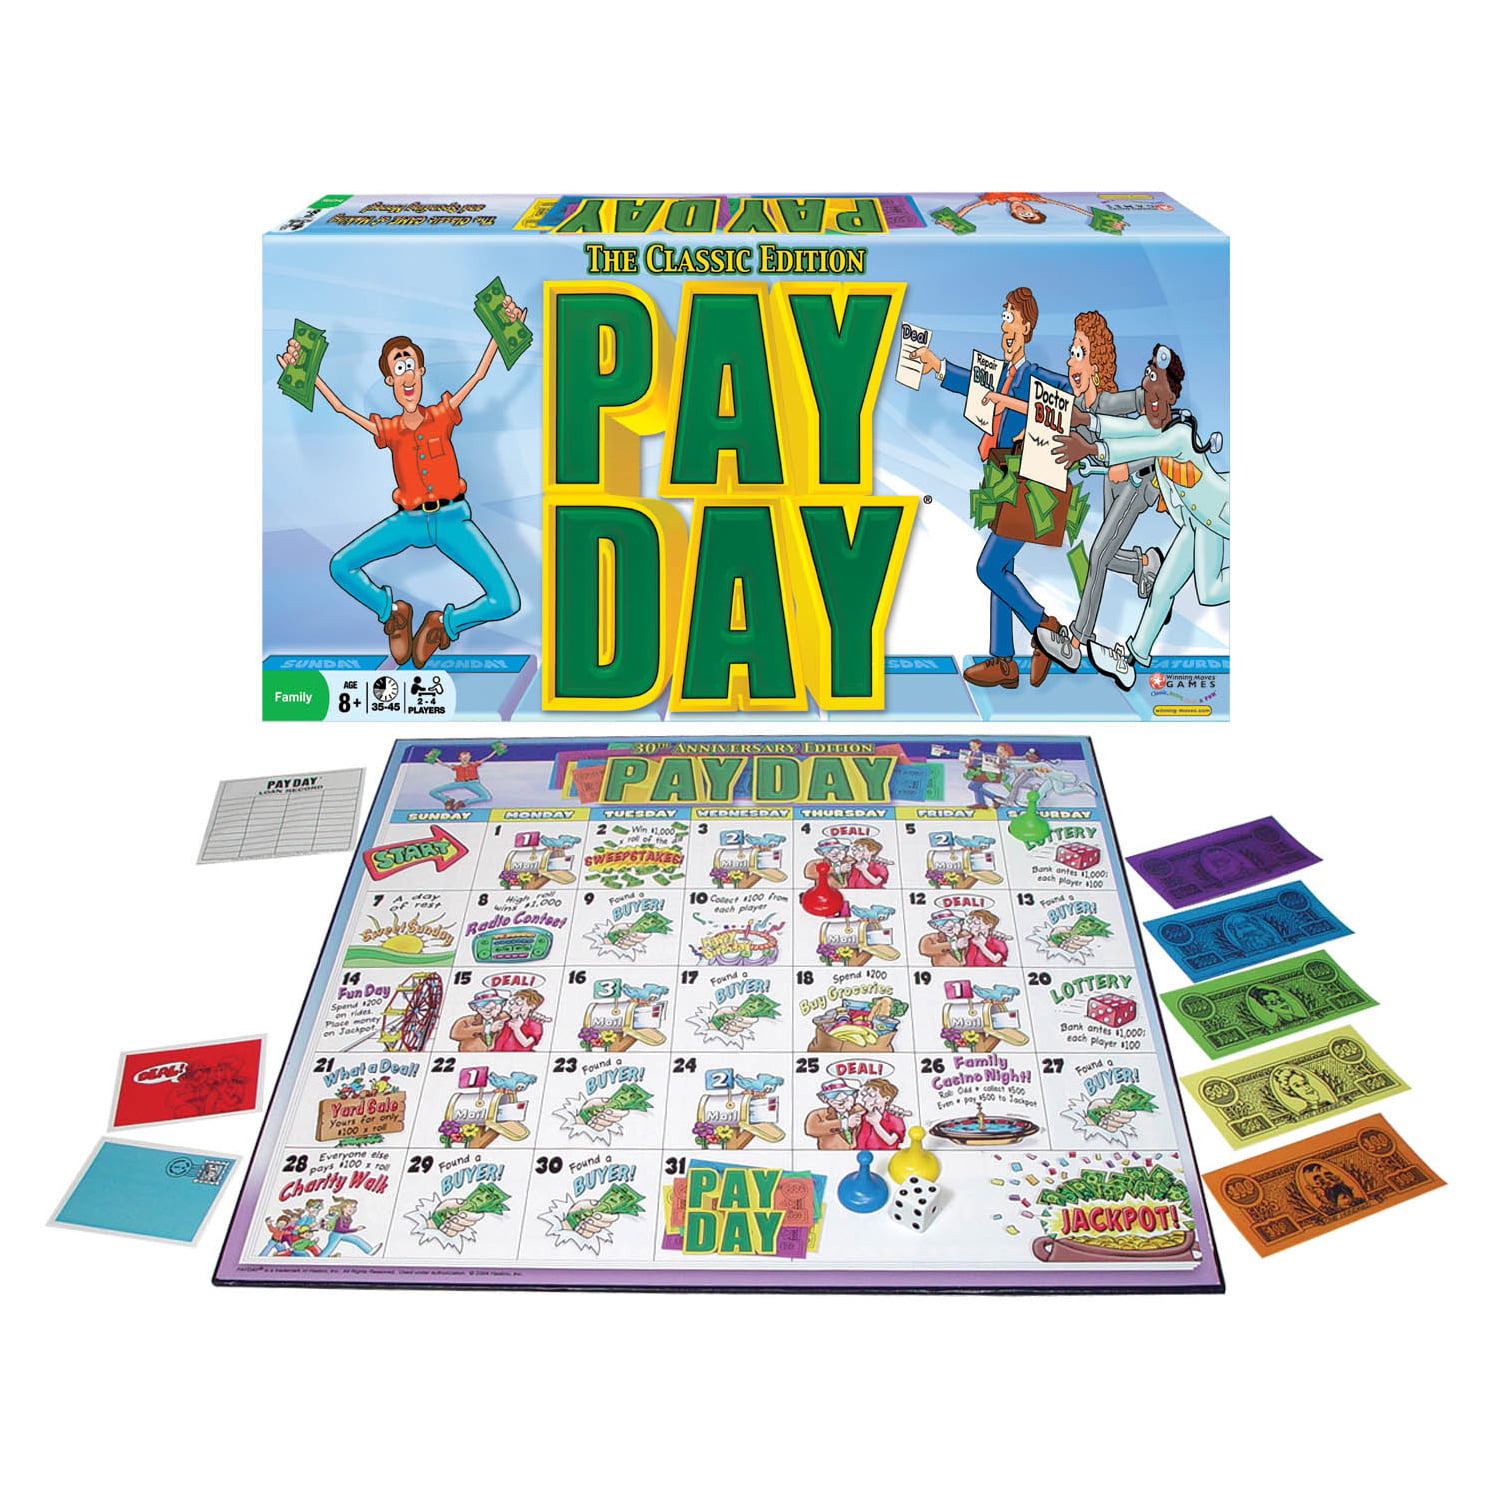 2-4 Sealed! Payday Board Game by Hasbro  A Fun Financial Learning Game Age 8